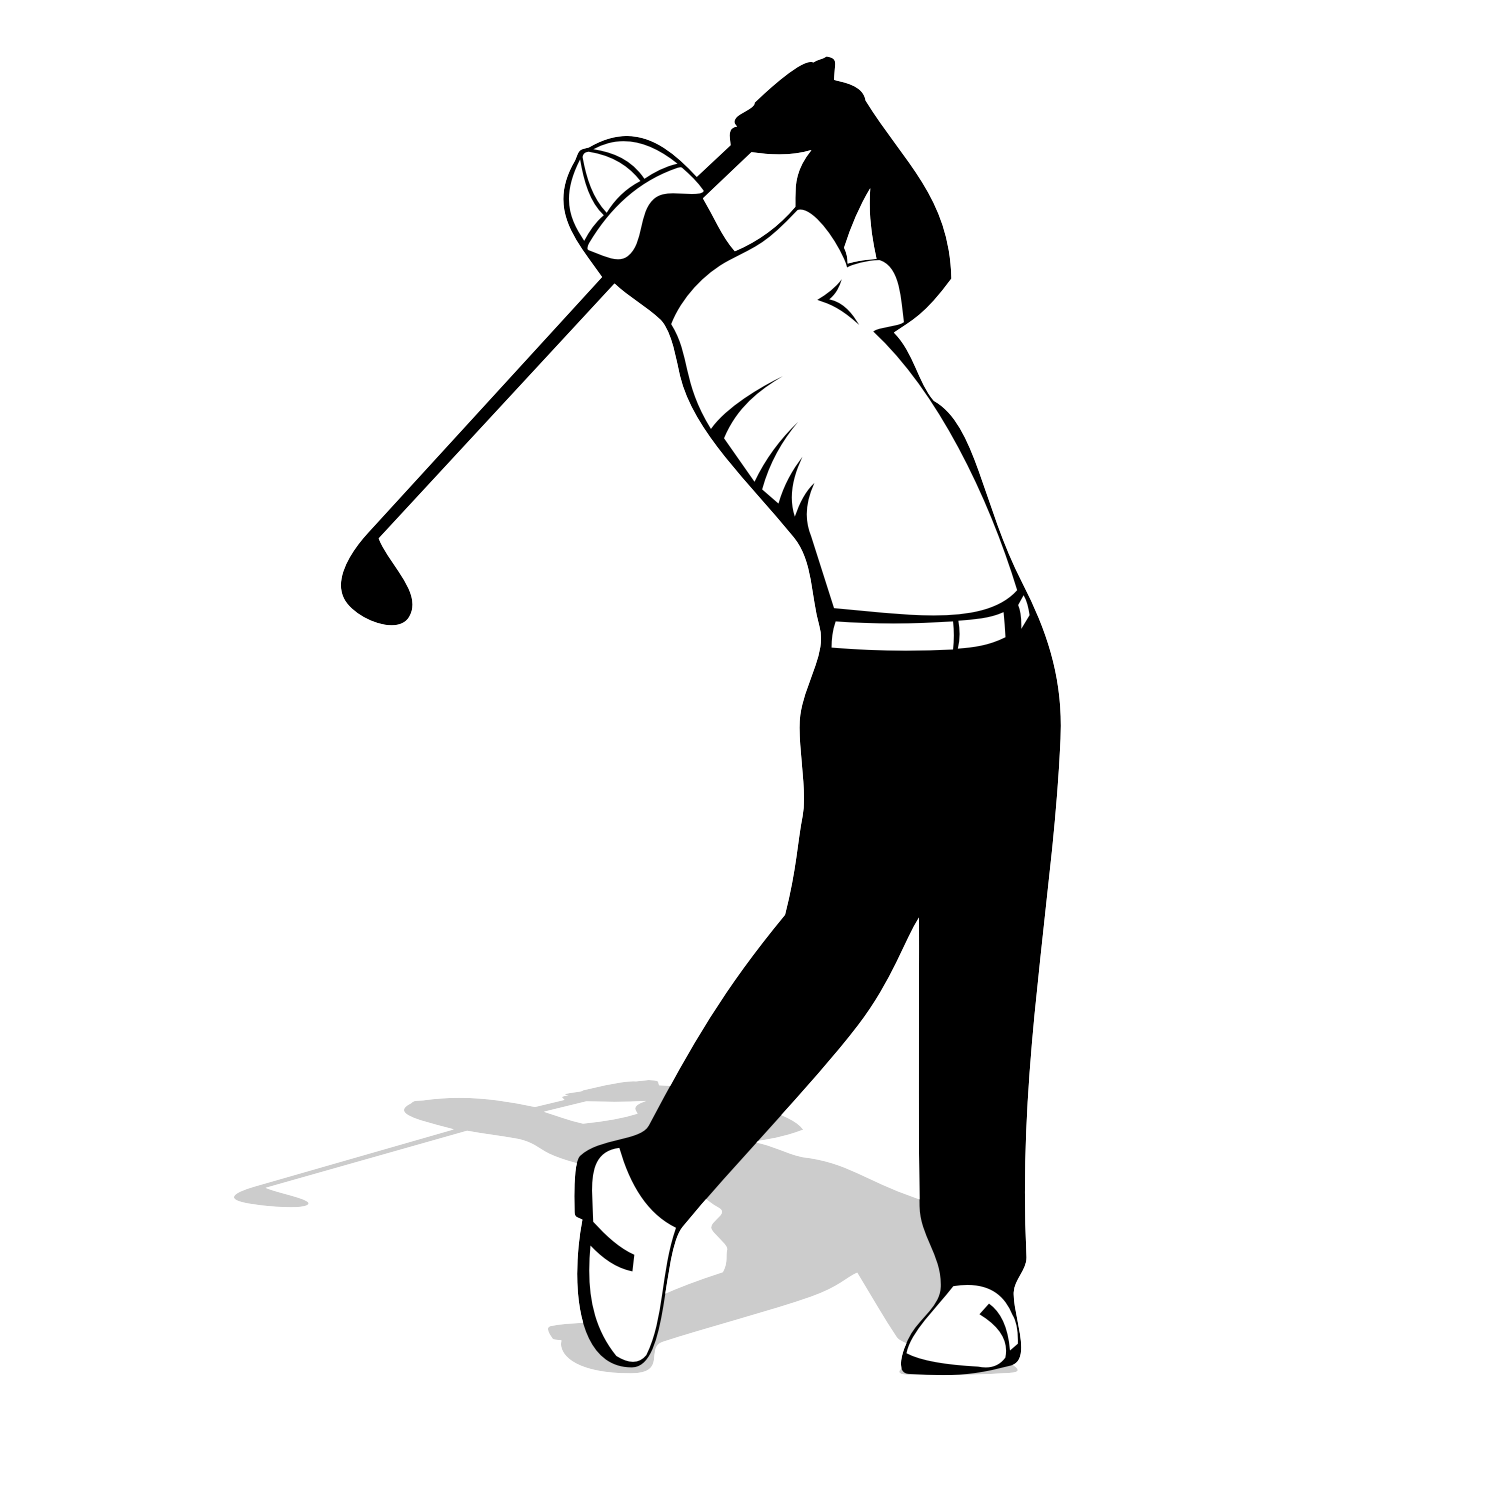 Golf clip art microsoft free clipart images 2.